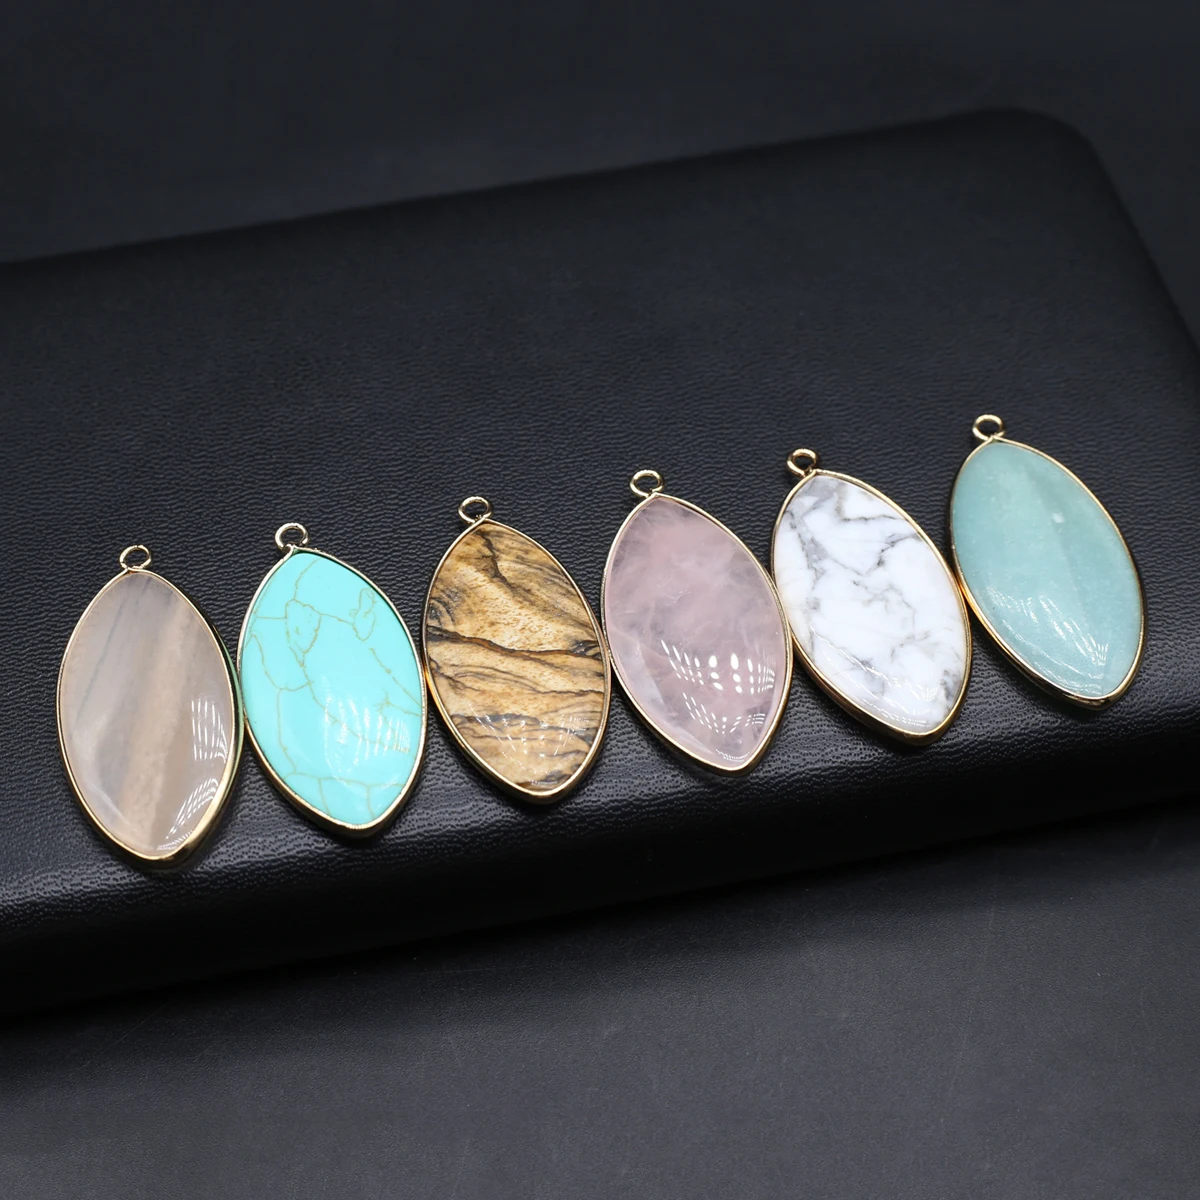 

7PCS Wholesale Natural Stone Rose Quartz Blue Turquoise Oval Pendant Jewelry Making DIY Necklace Earrings Accessories Gift